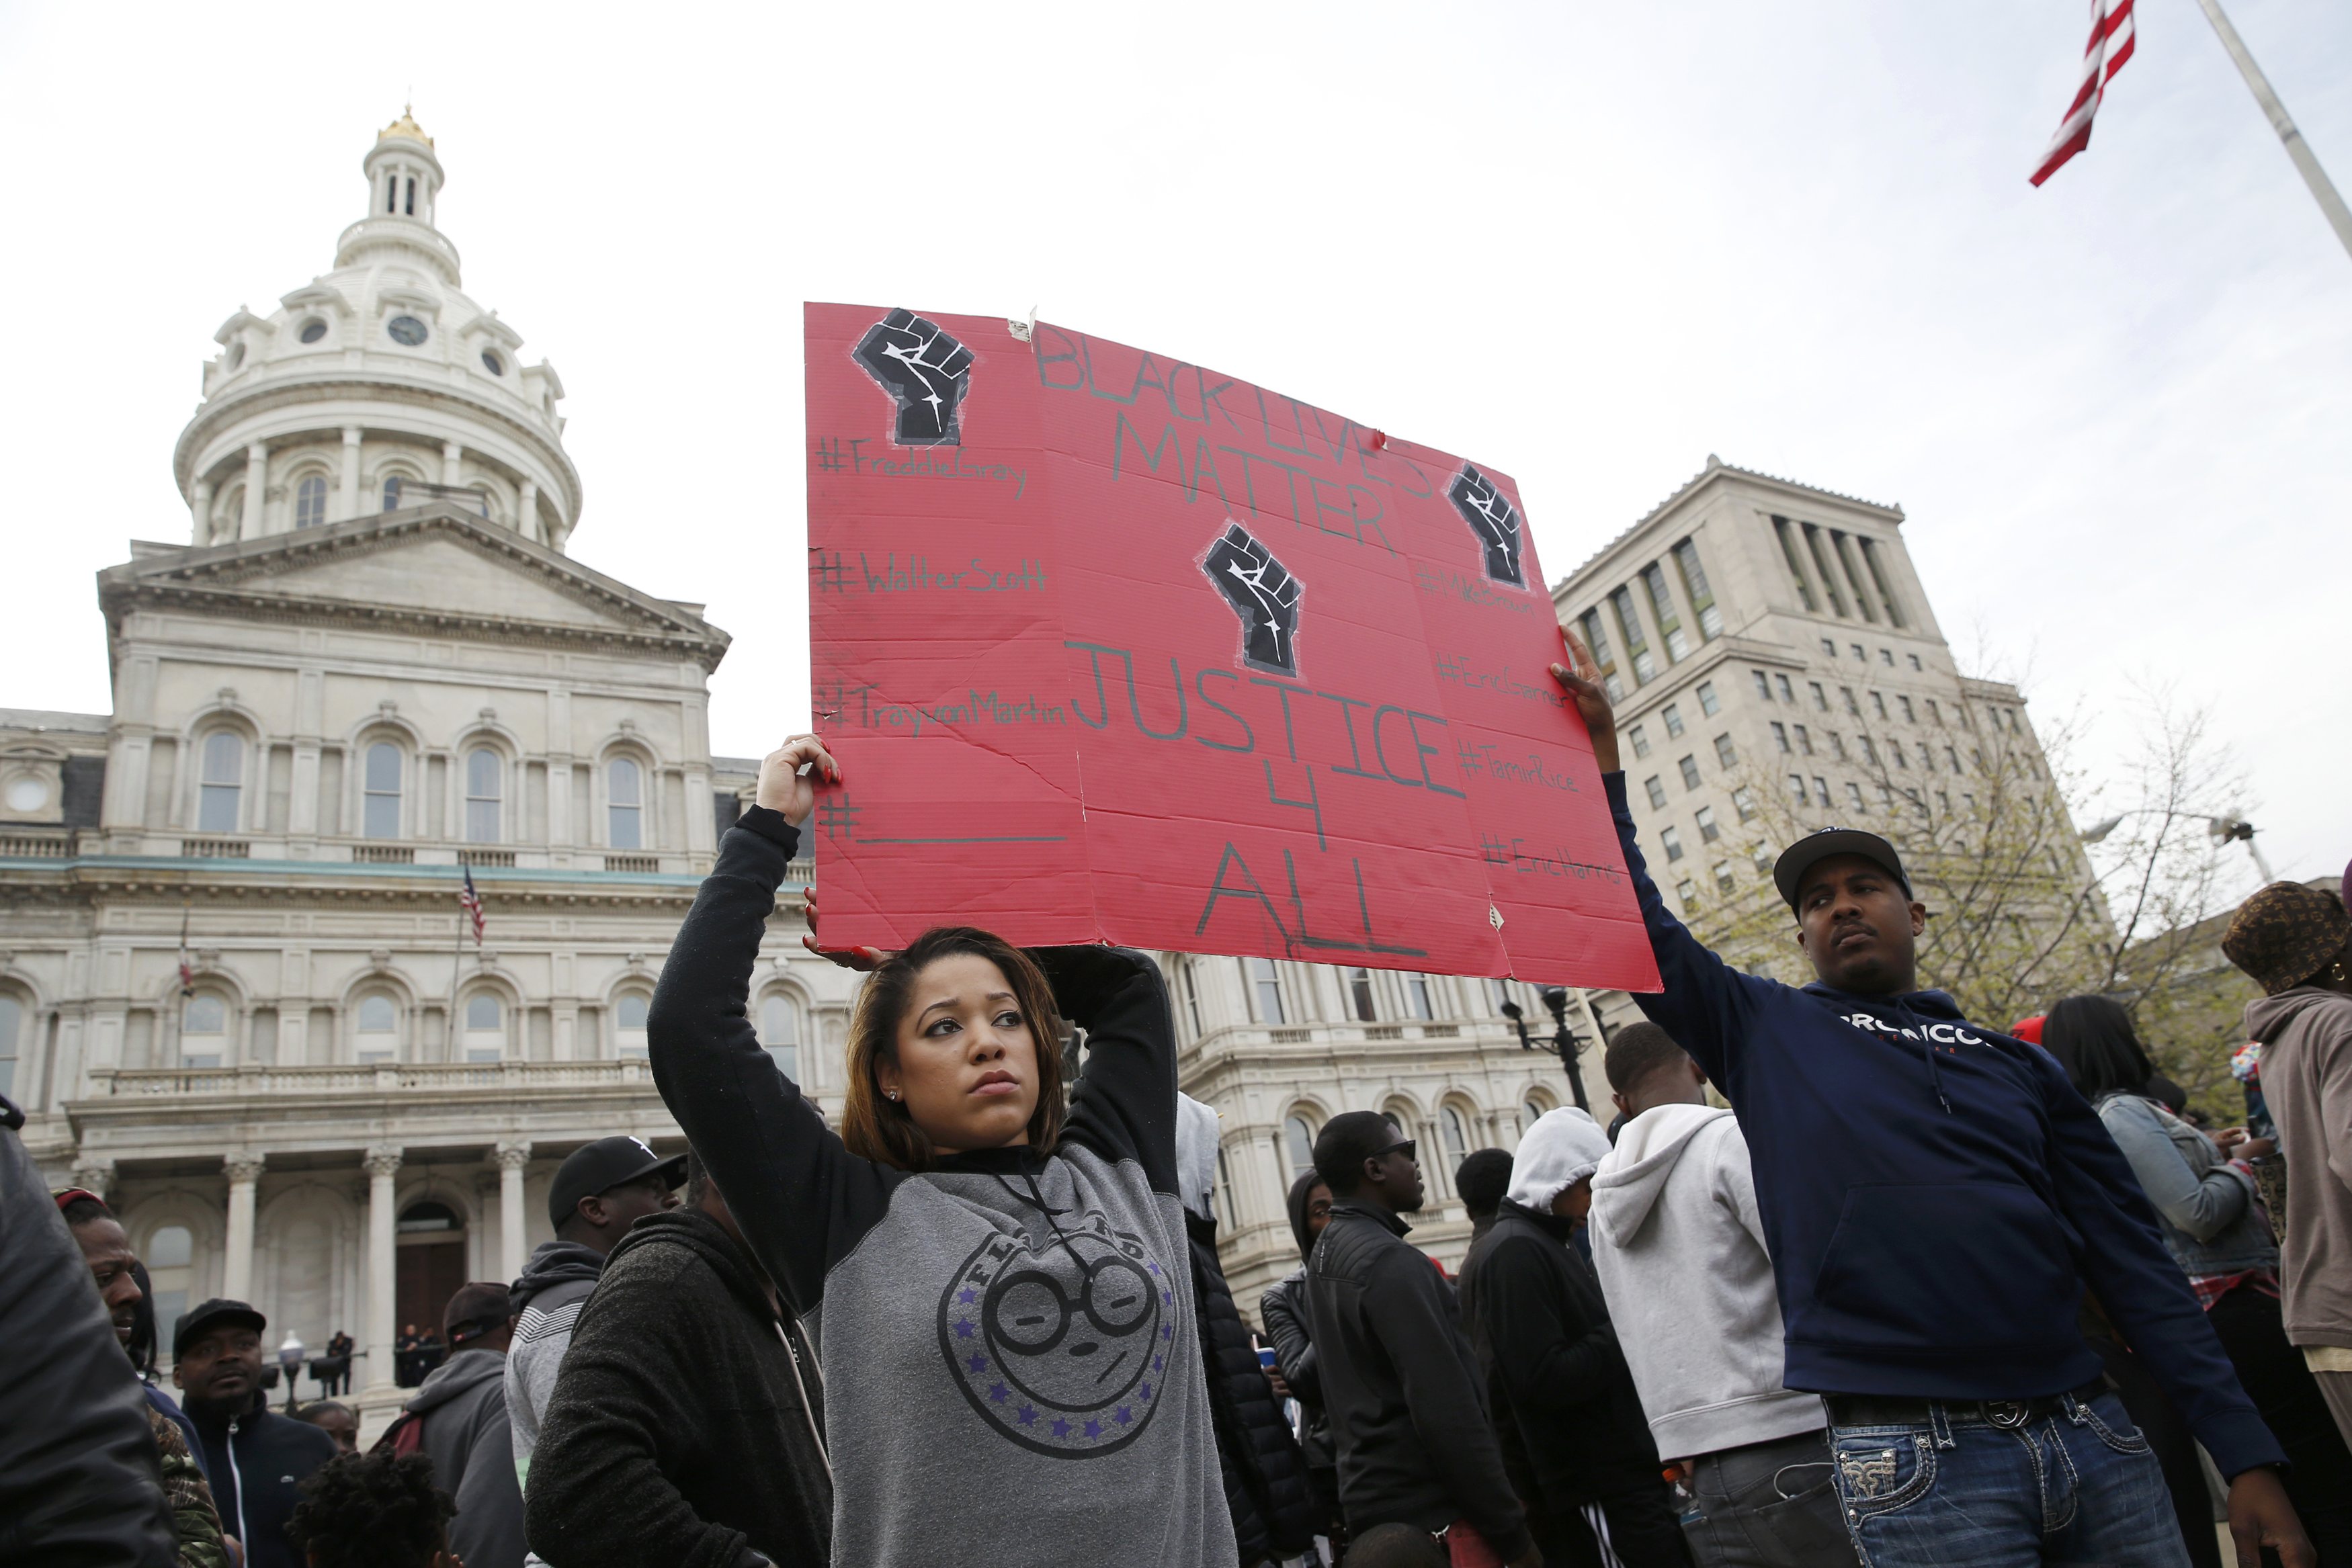 Protesters gather for a rally in Baltimore to protest the death of Freddie Gray, who died while in police custody.